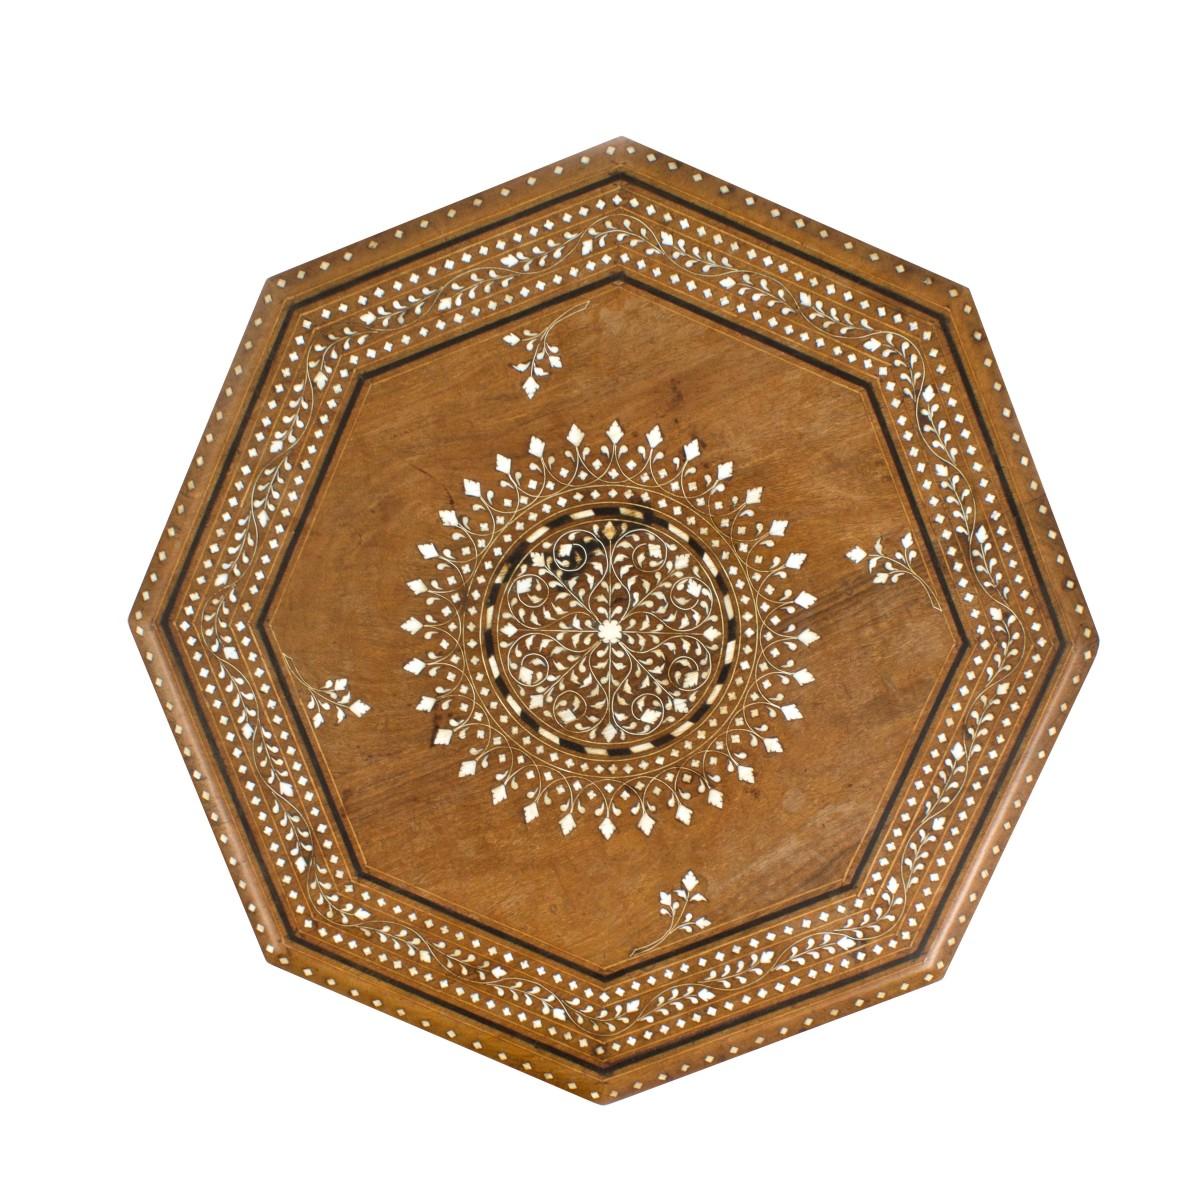 An Anglo-Indian folding octagonal side table featuring an inlaid design, circa 1950.